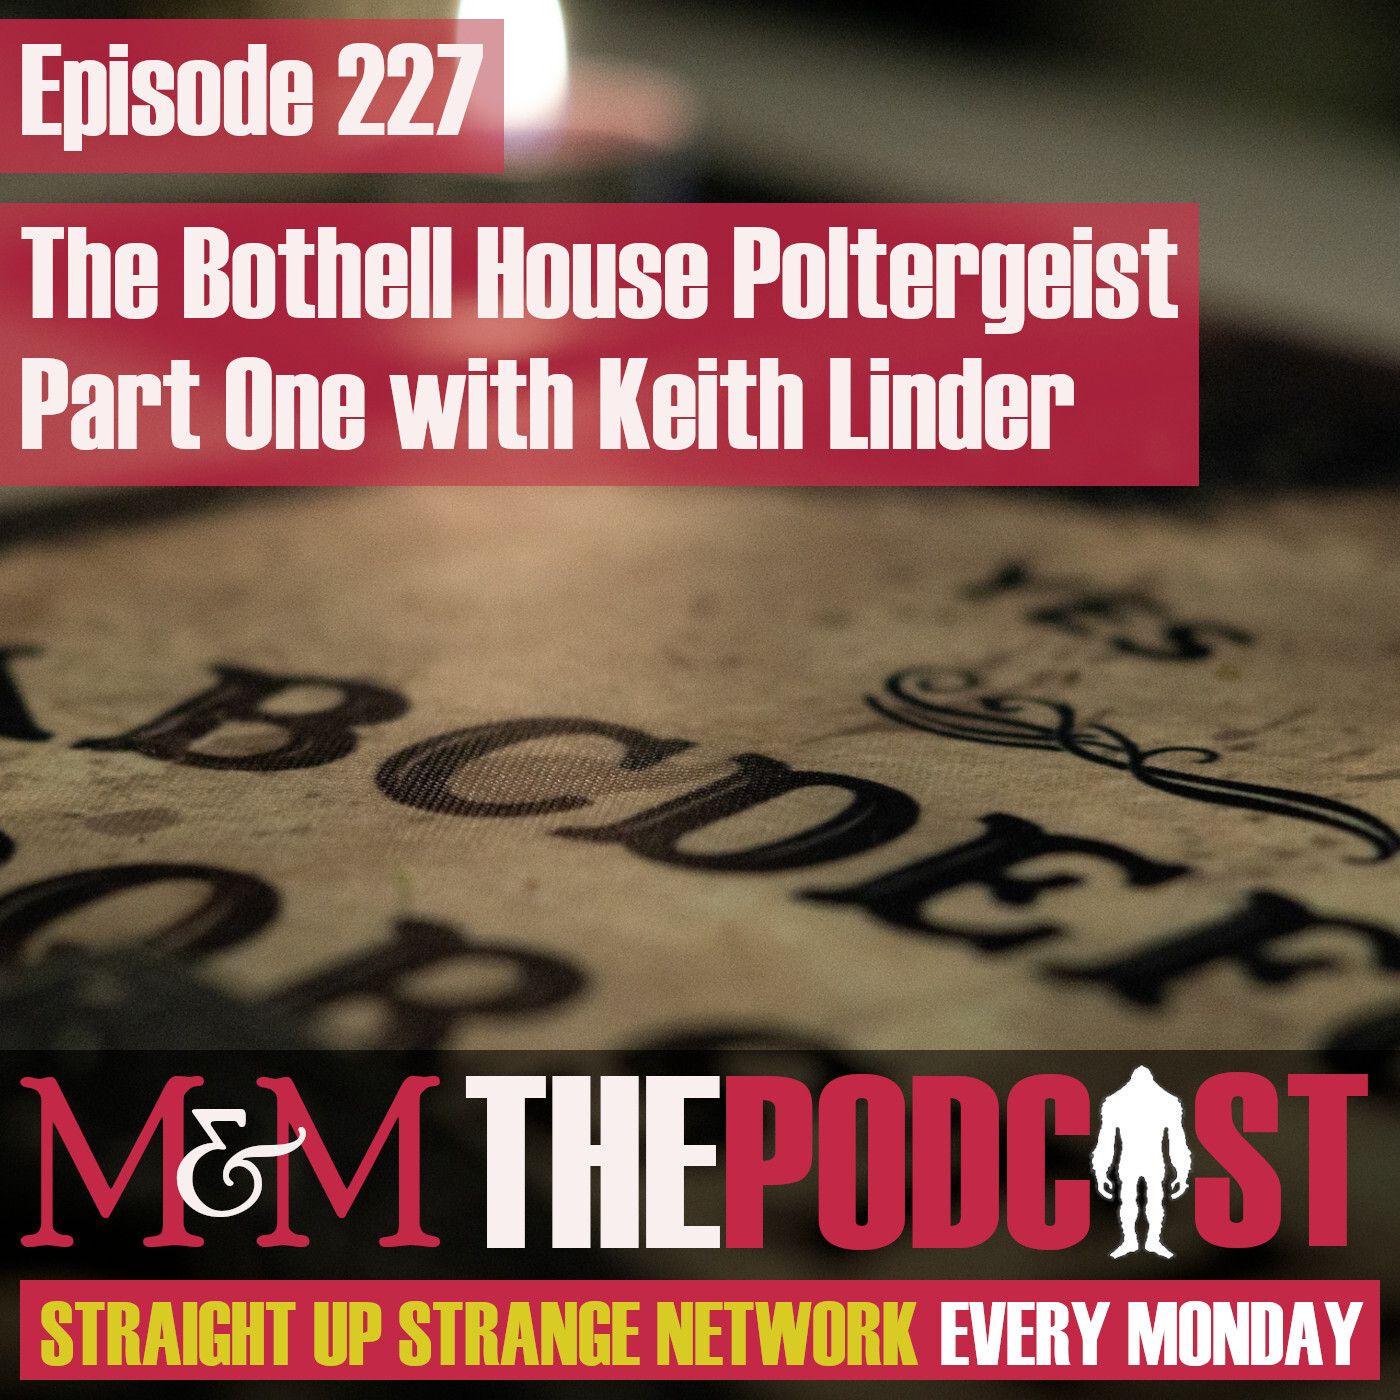 Mysteries and Monsters: Episode 227 The Bothell House Poltergeist Part One with Keith Linder